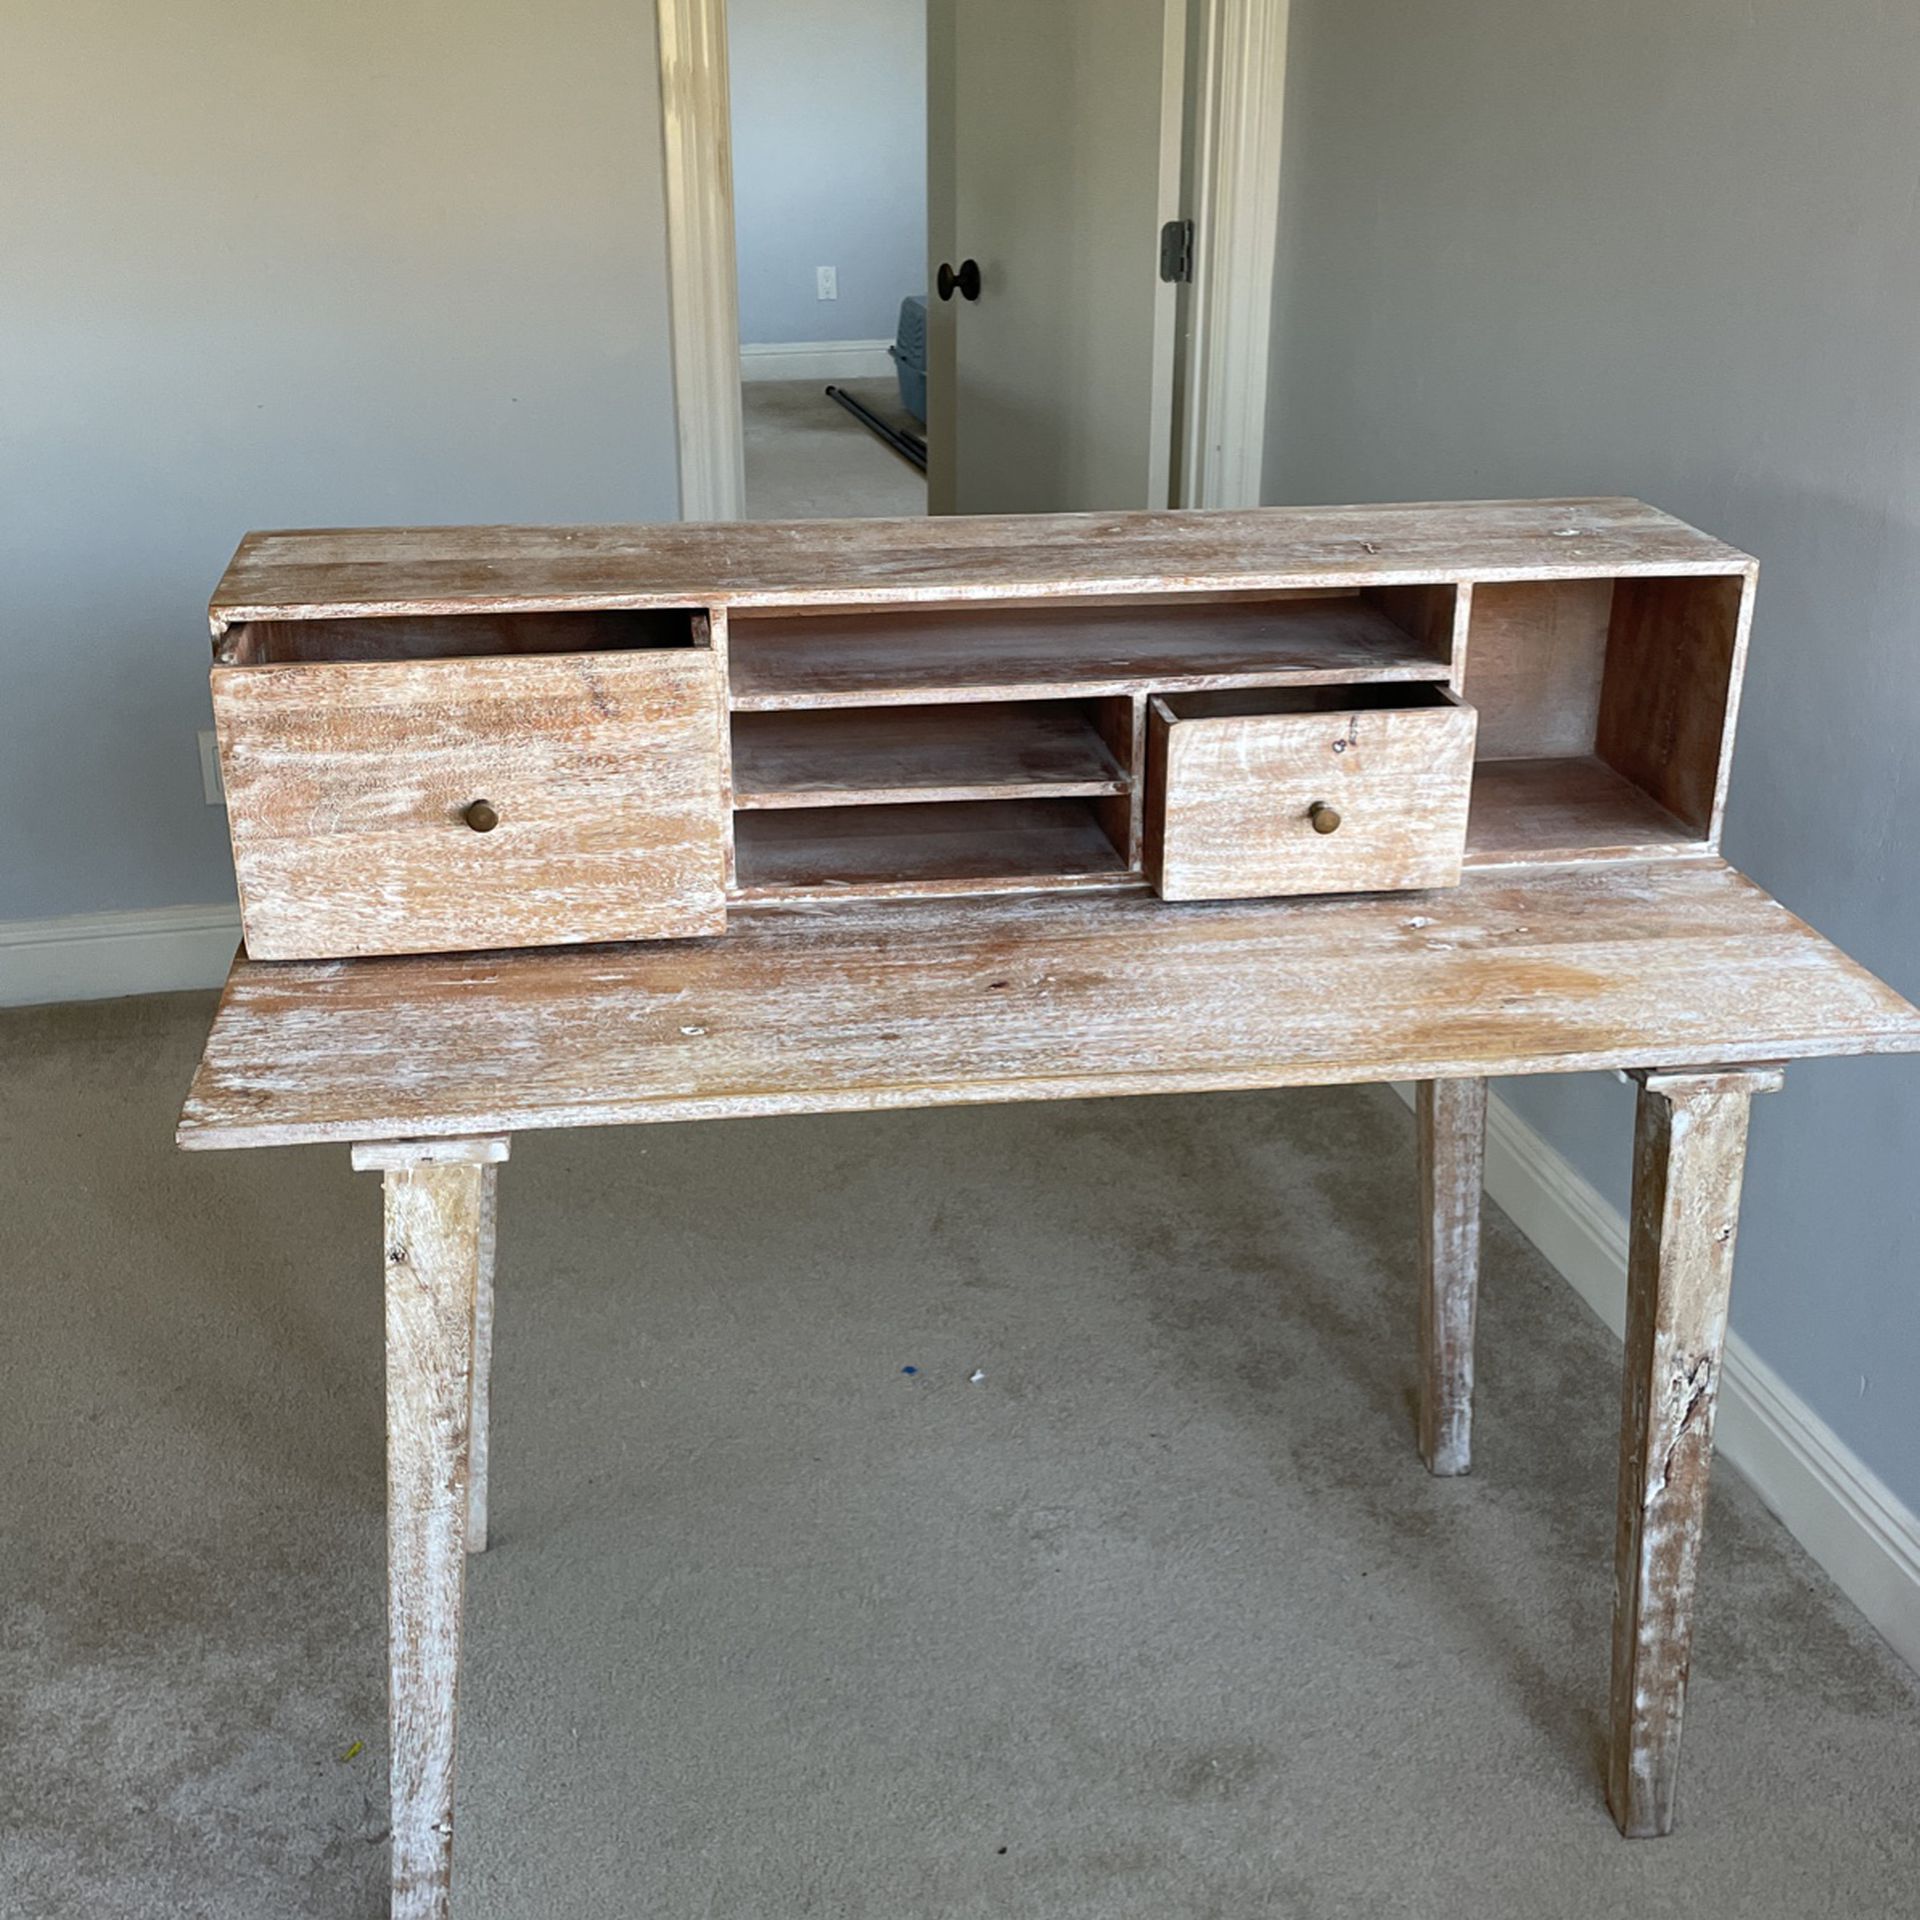 Distressed Desk W 2 Drawers , One Leg A Little Wobbly